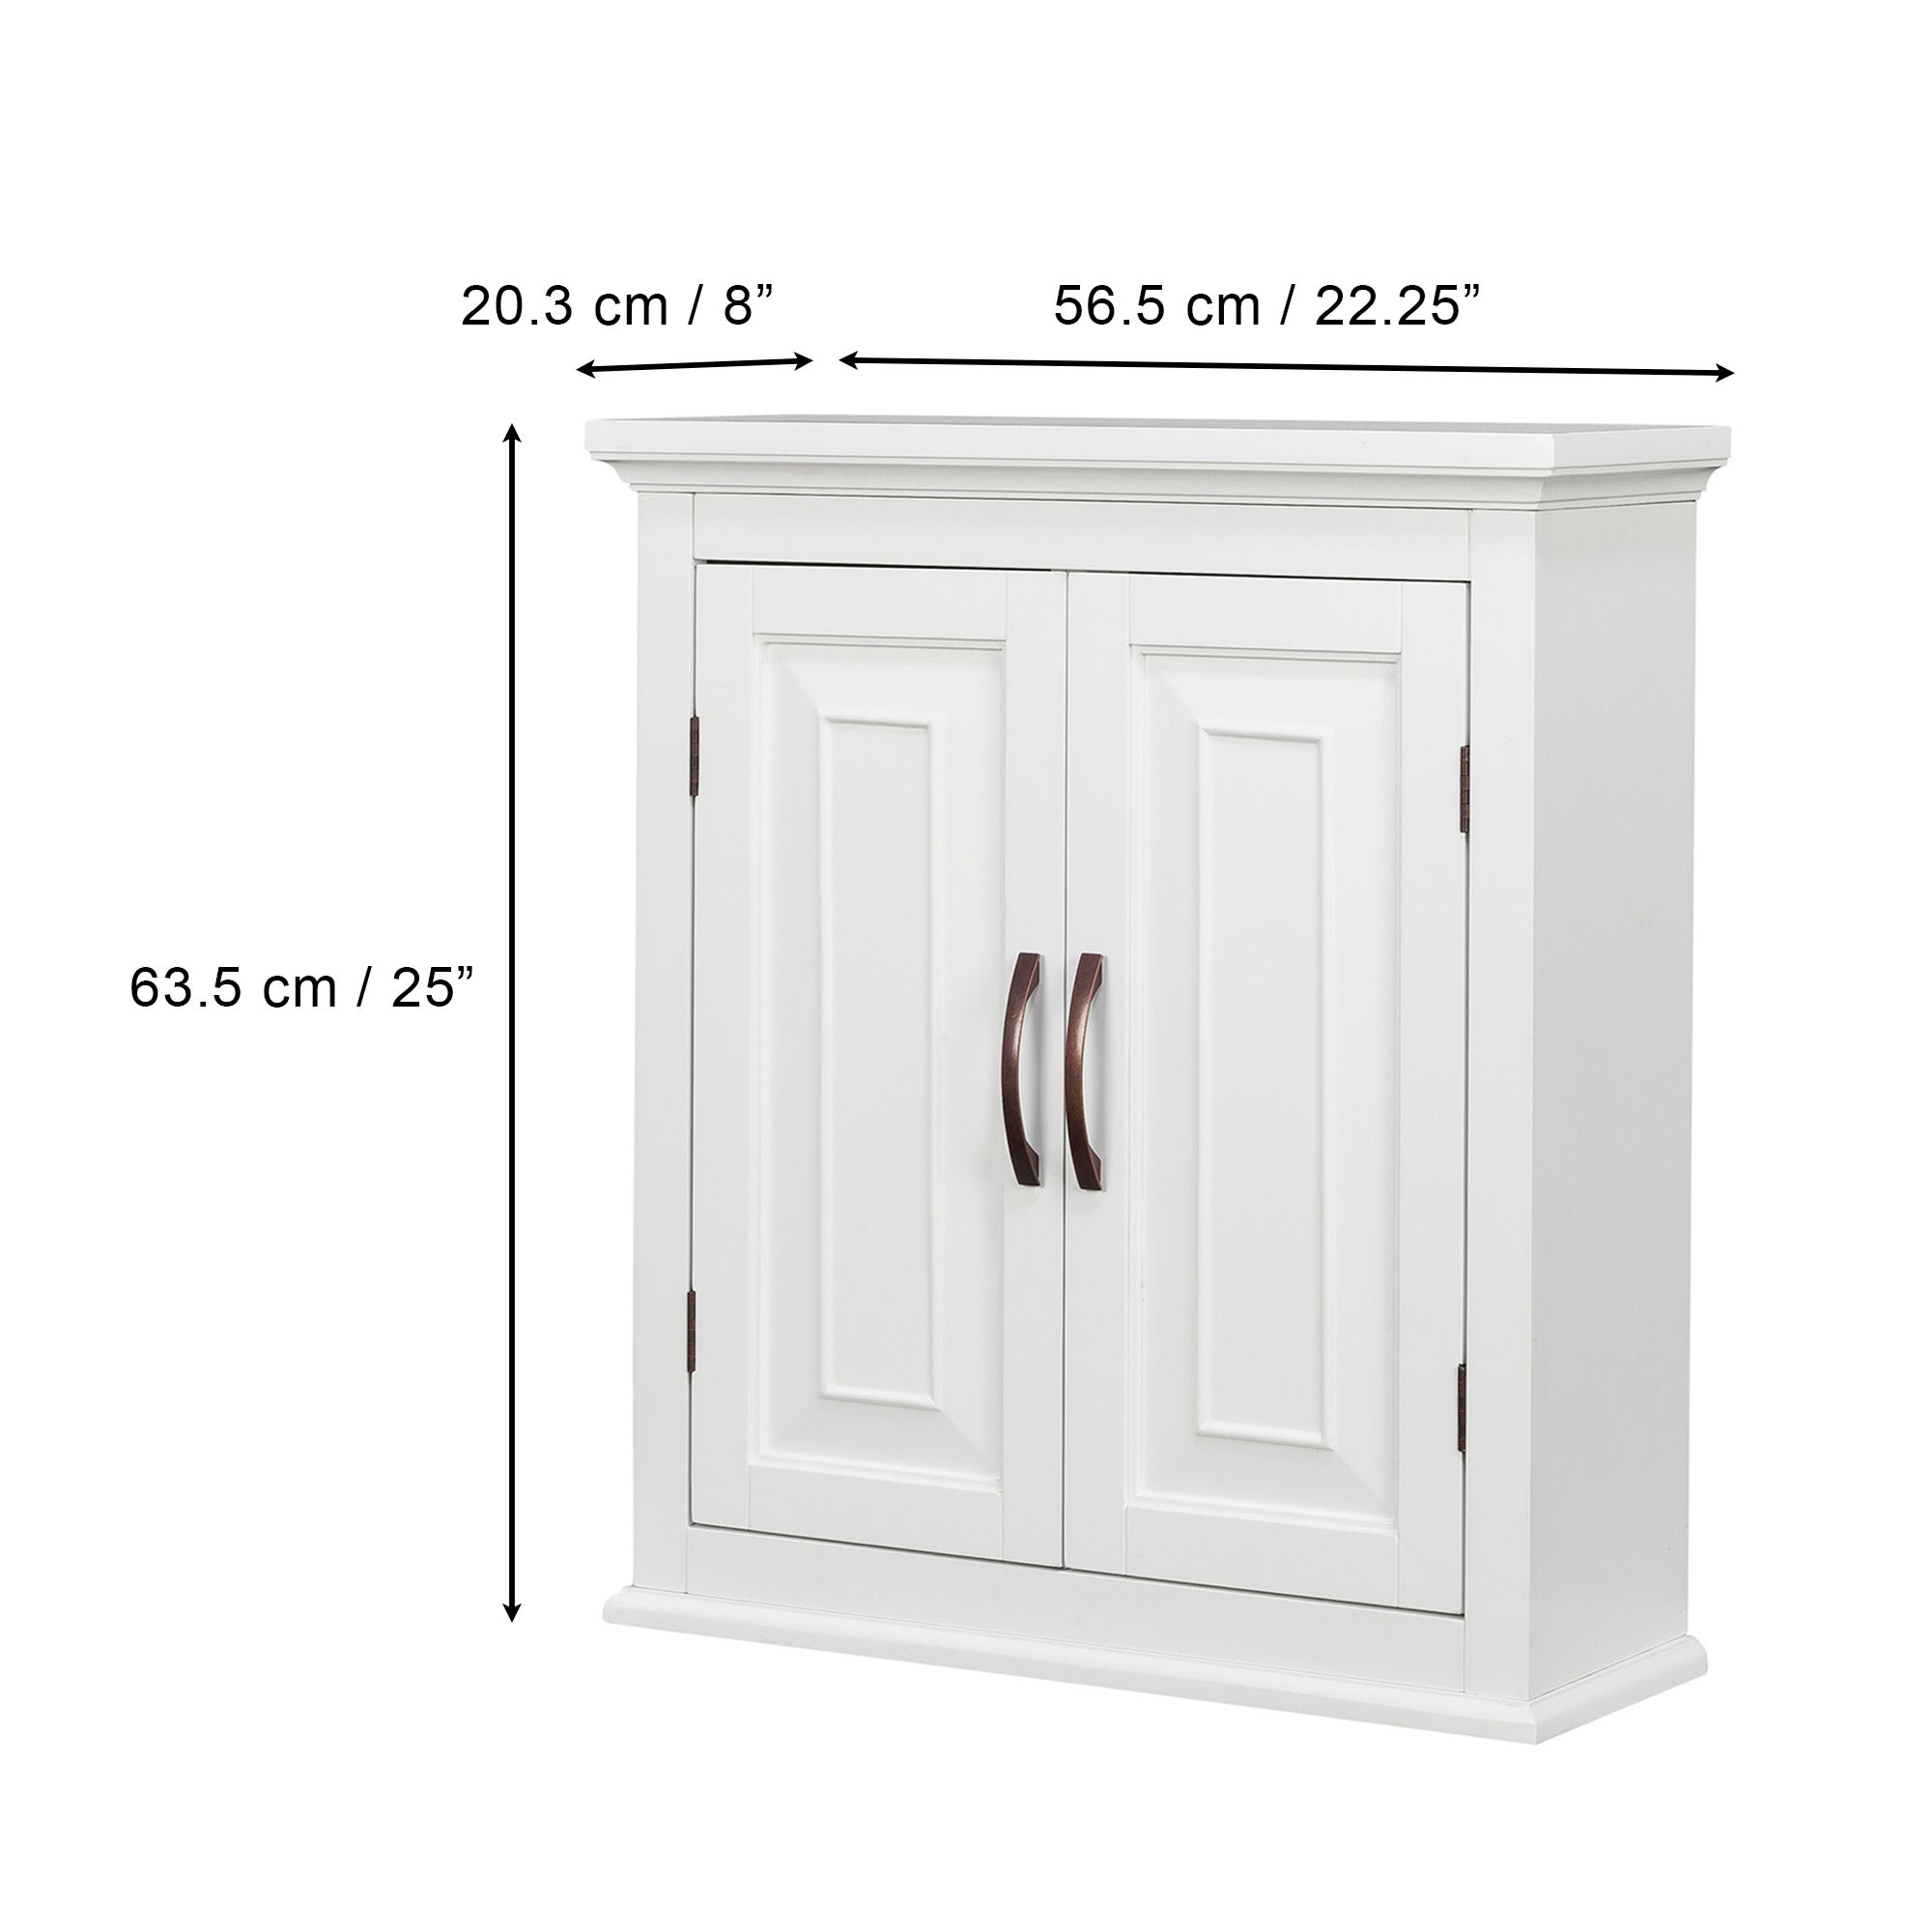 Teamson Home St. James Wooden Wall Cabinet with 2 Shelves, White